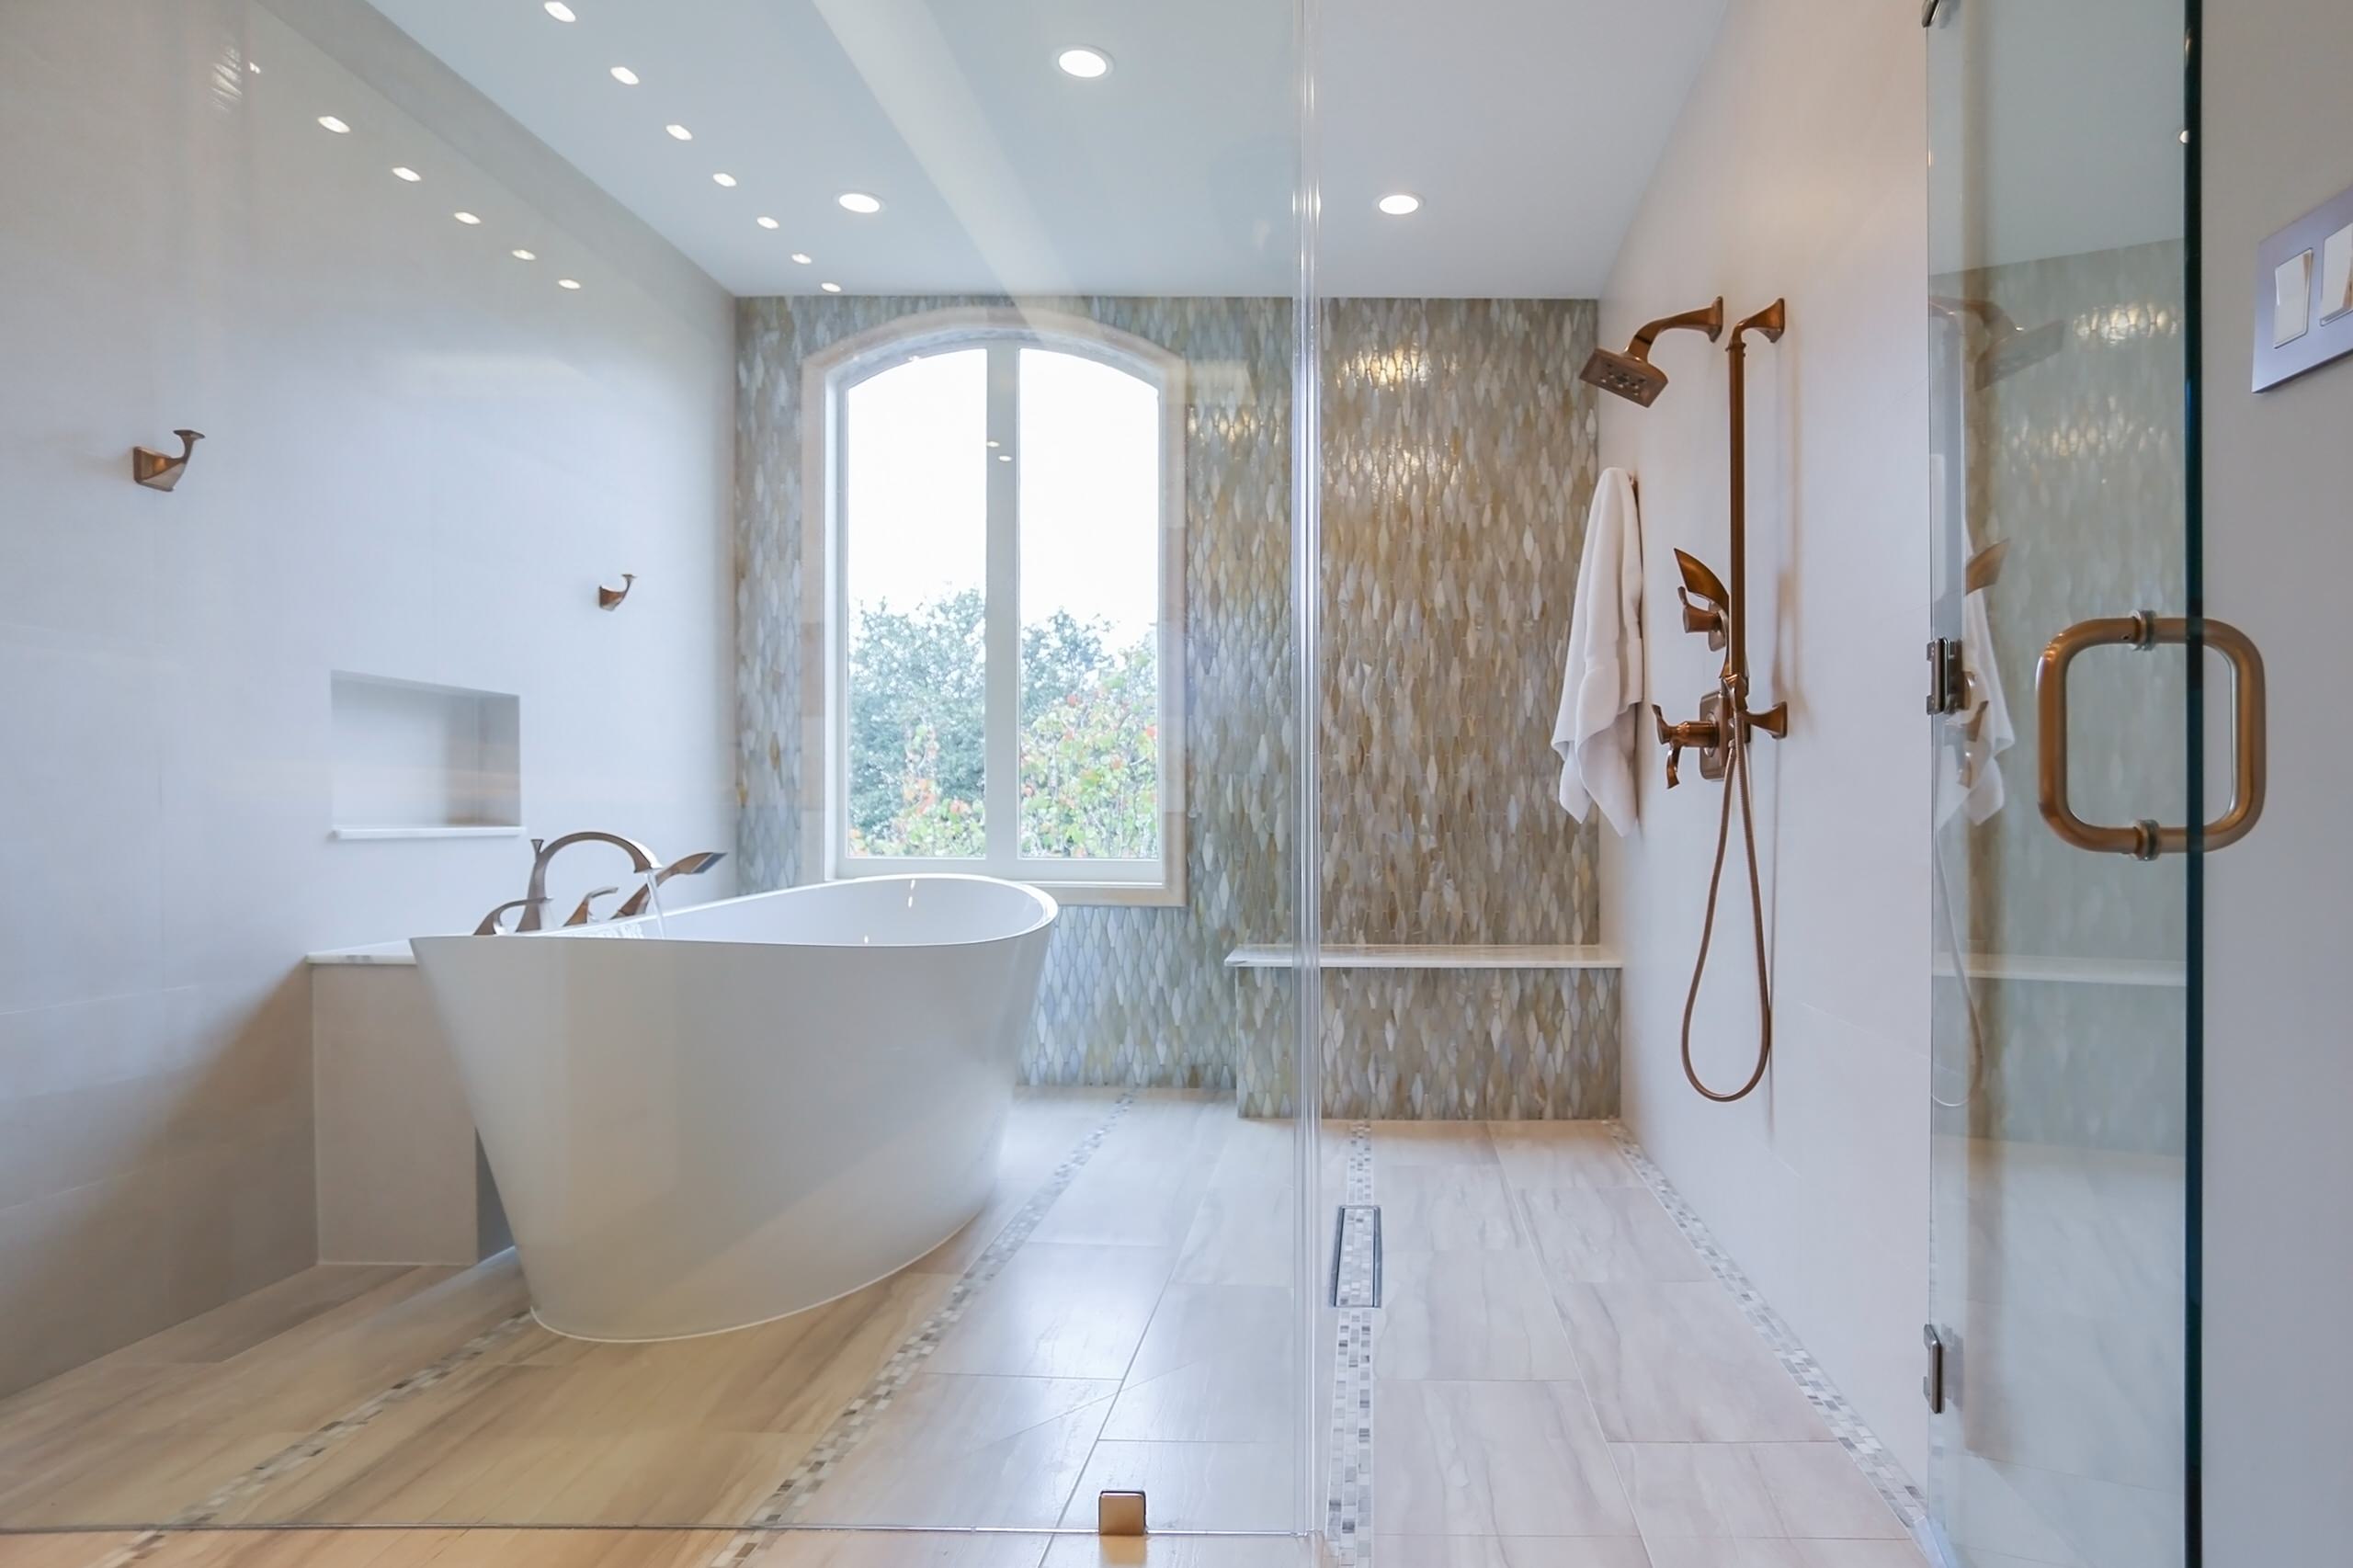 Freestanding tub is a modern choice (from Houzz)